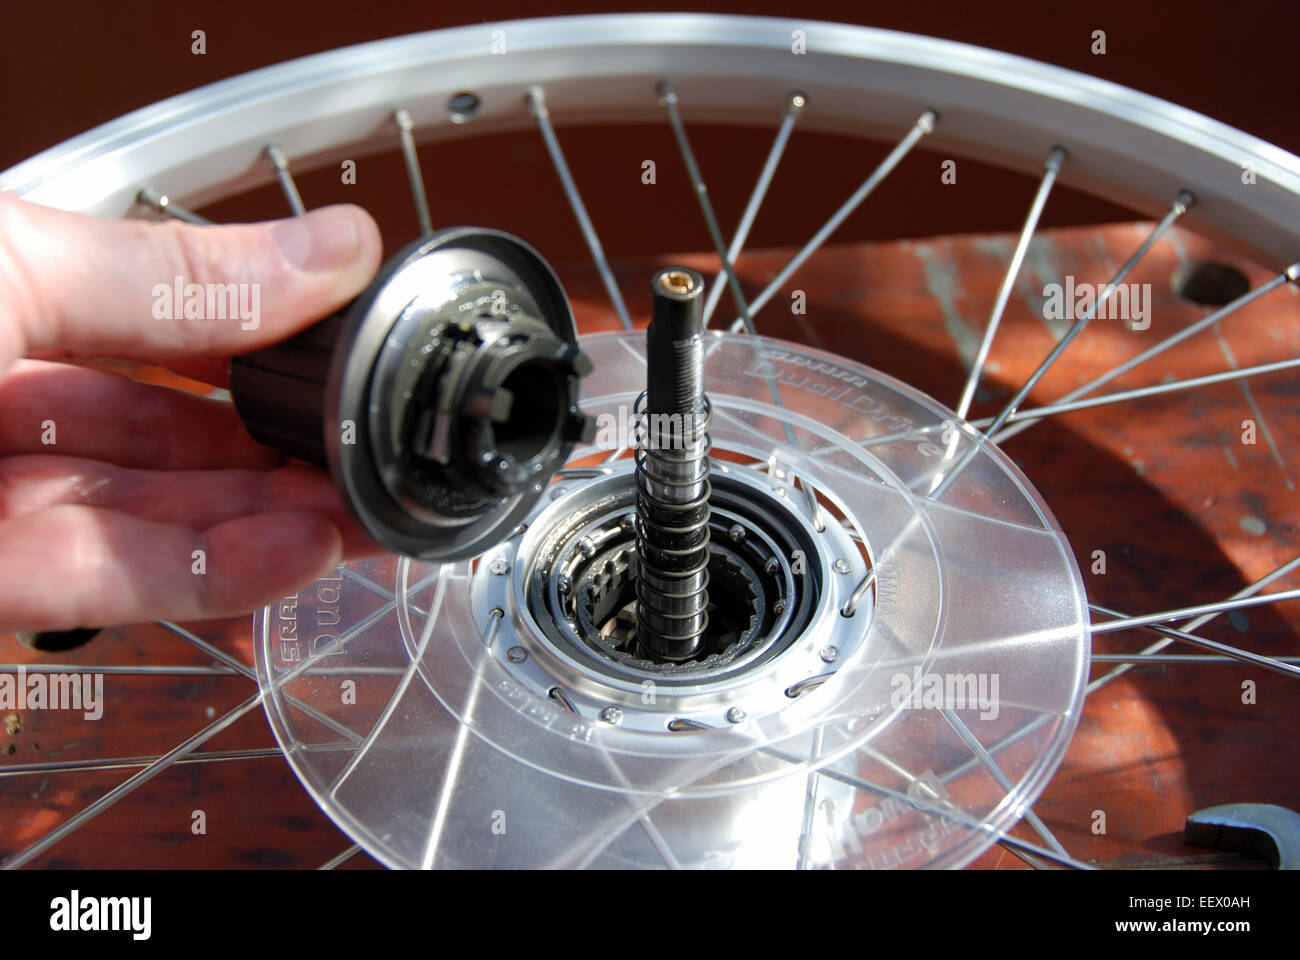 Fitting a new SRAM dual drive hub to a bicycle wheel Stock Photo - Alamy